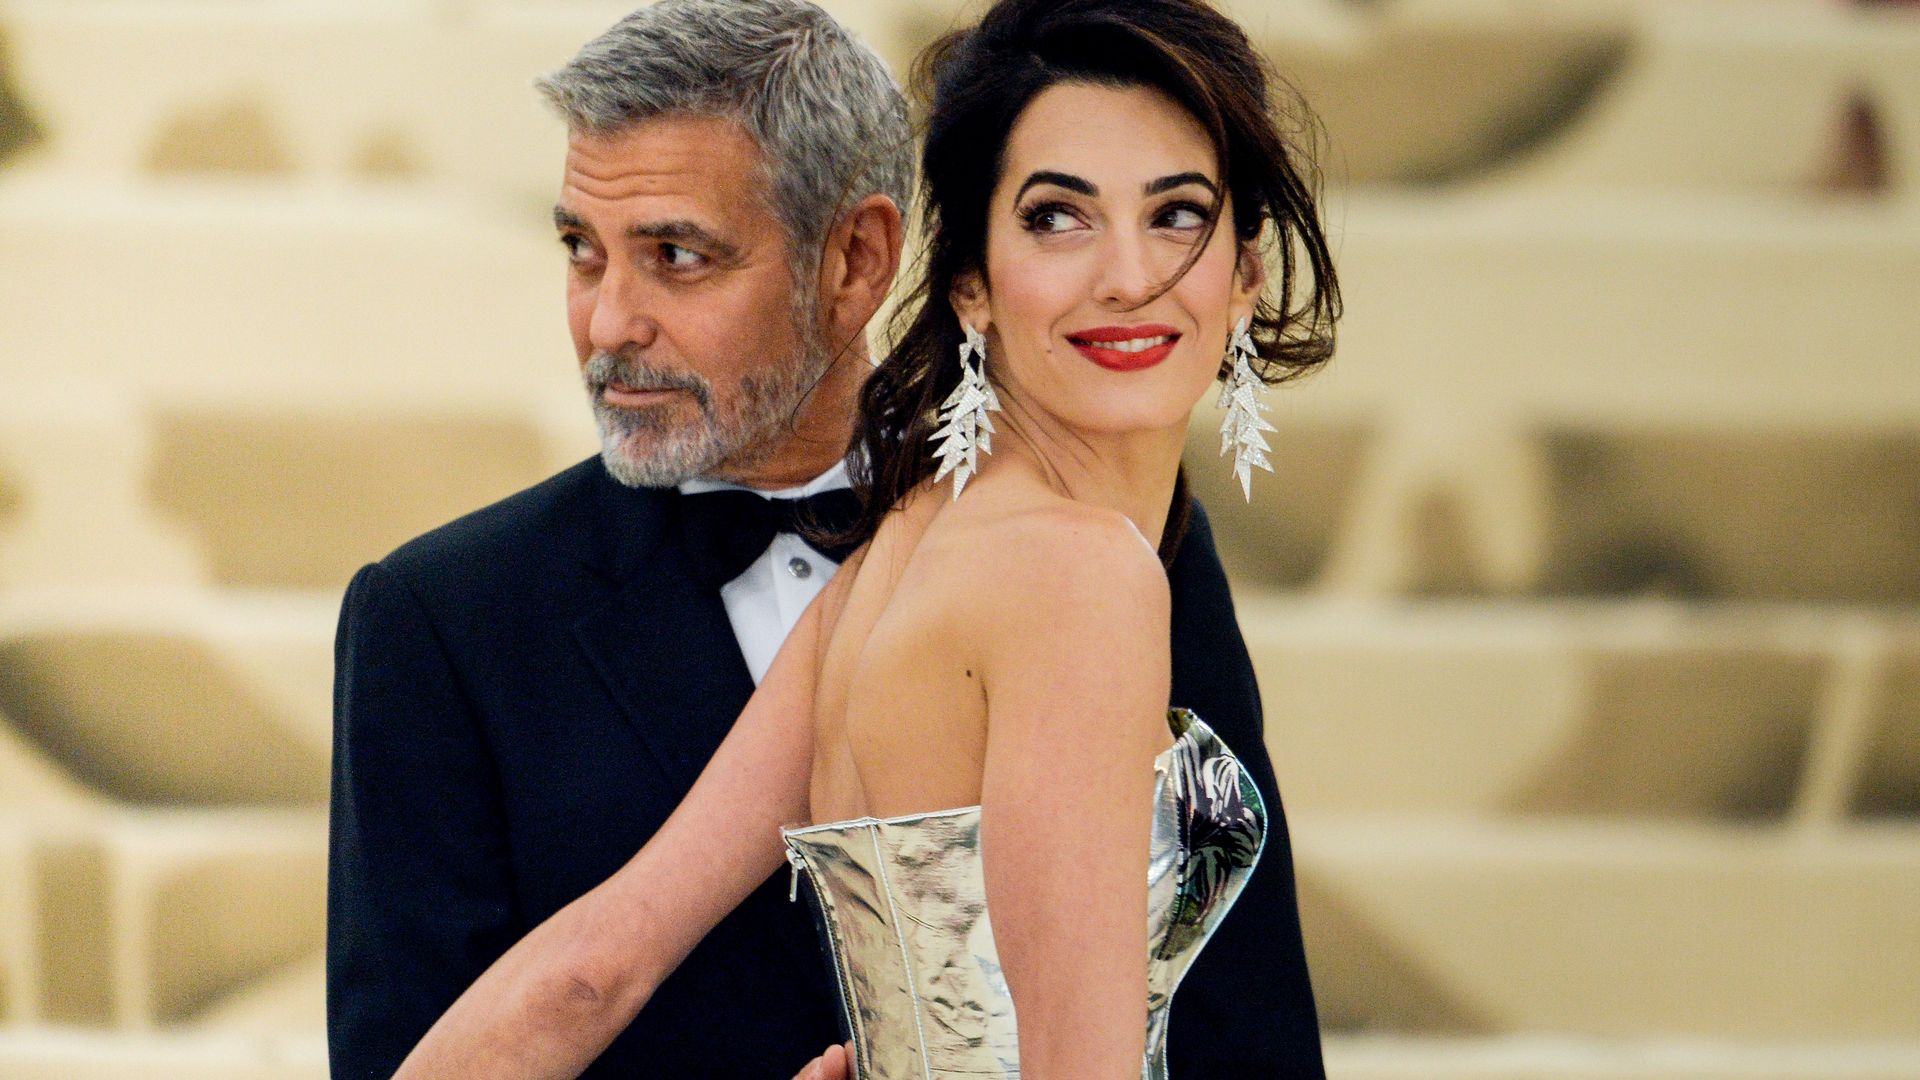 George and Amal at the Met Gala